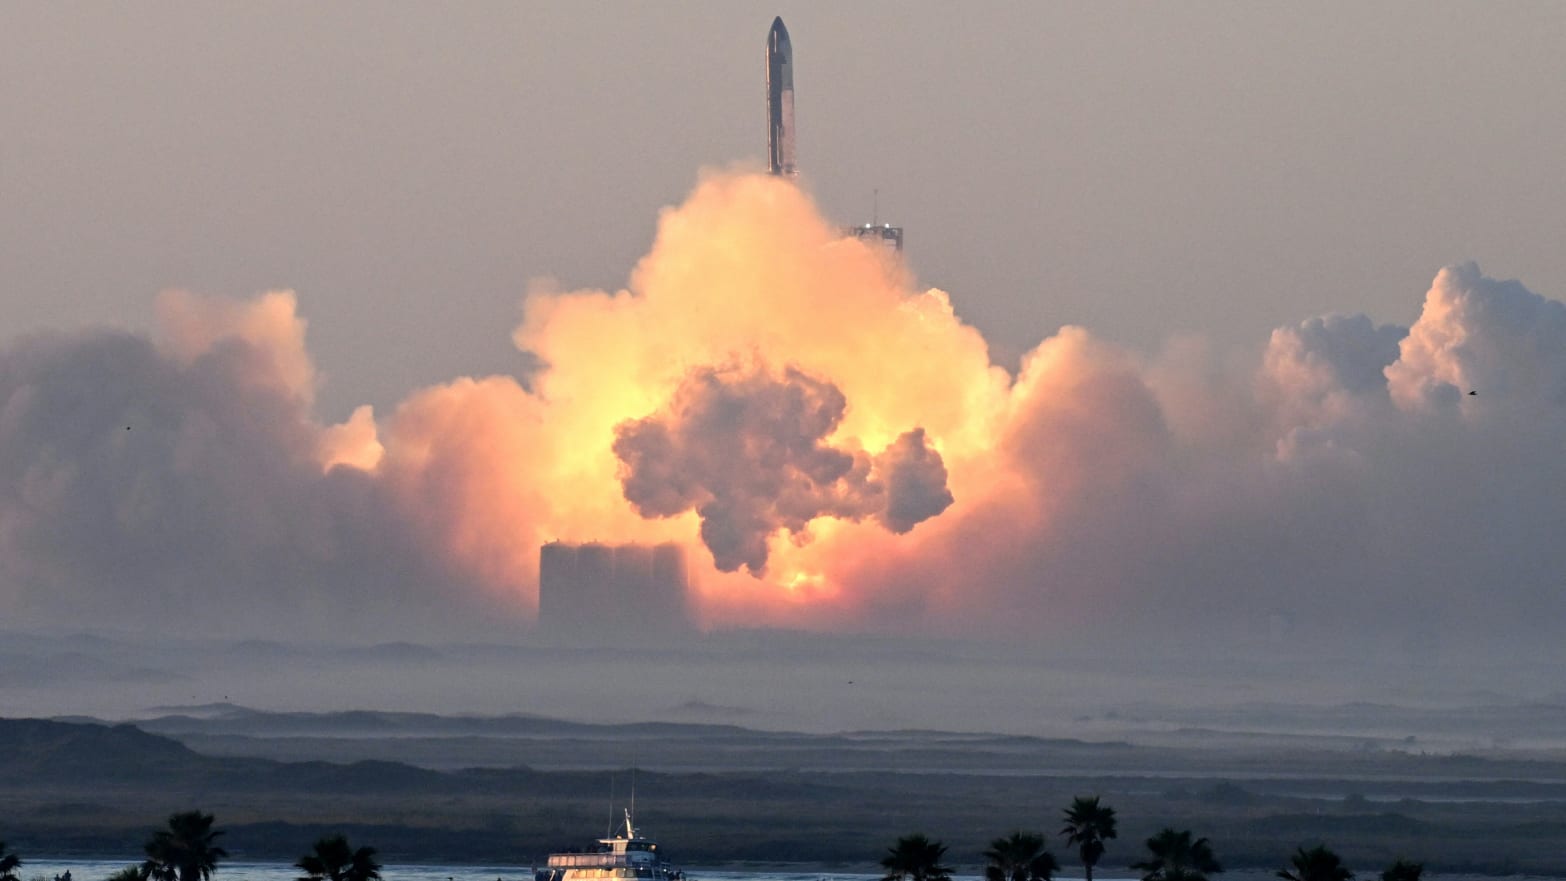 SpaceX's Starship rocket launches from Starbase during its second test flight in Boca Chica, Texas